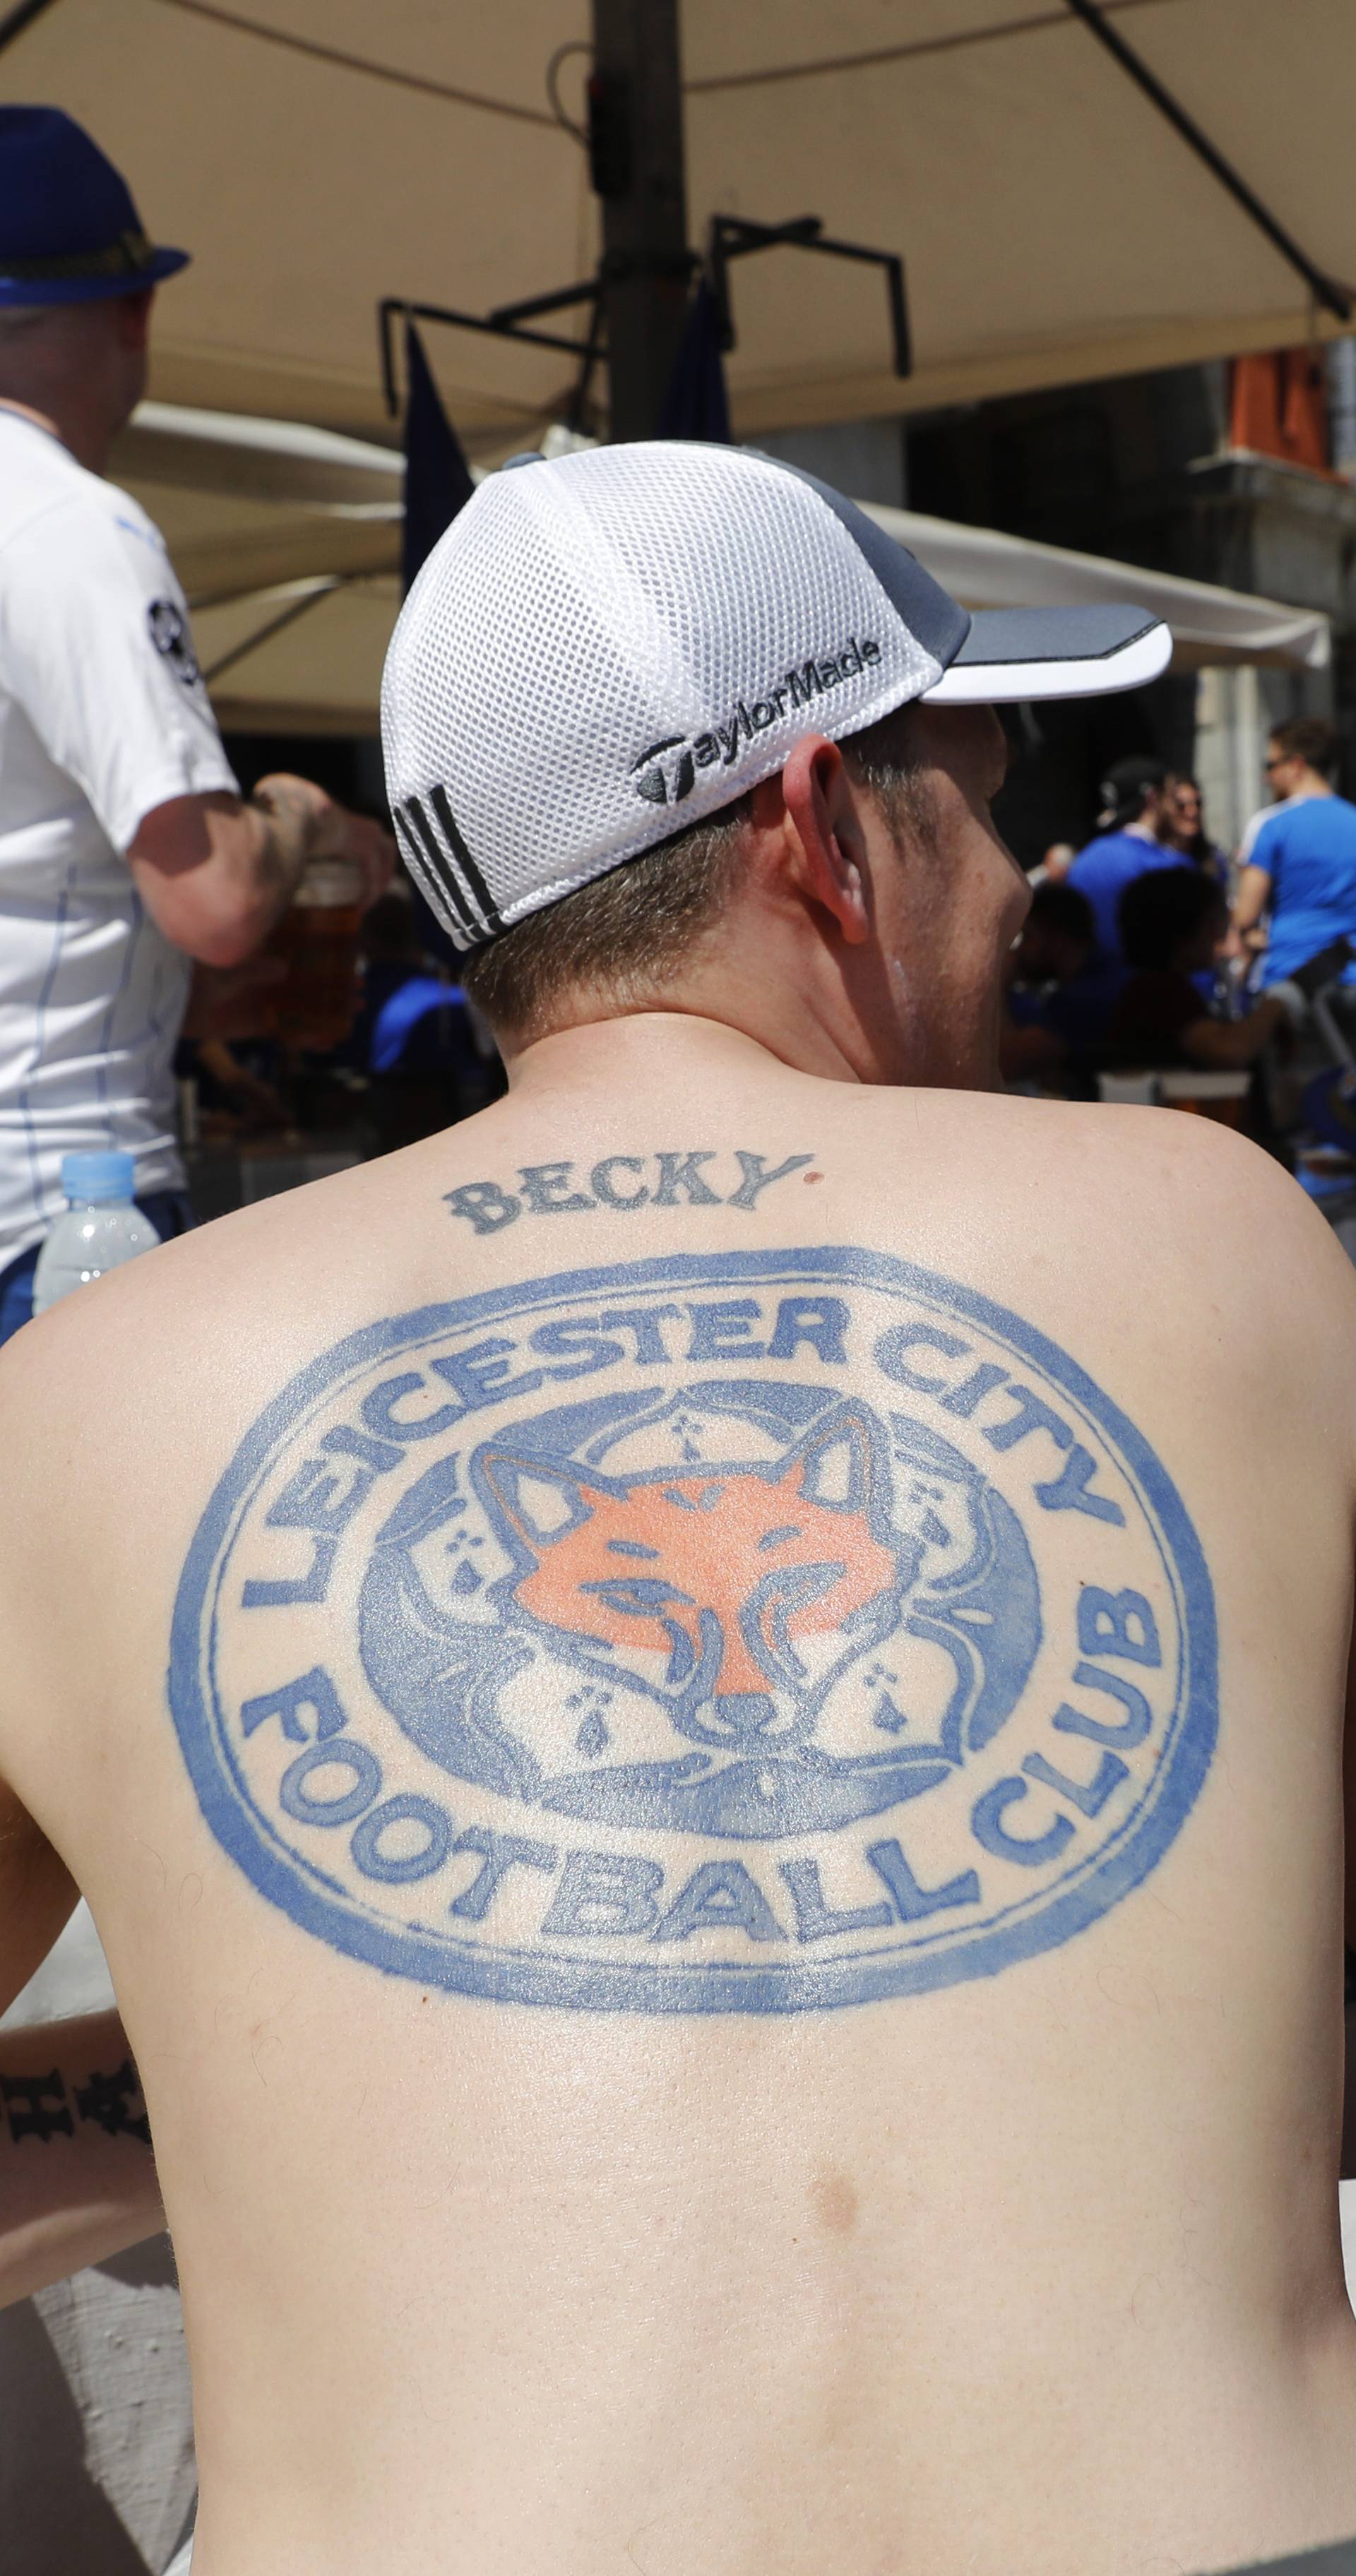 A Leicester fan display a tattoo in the Plaza Mayor before the match